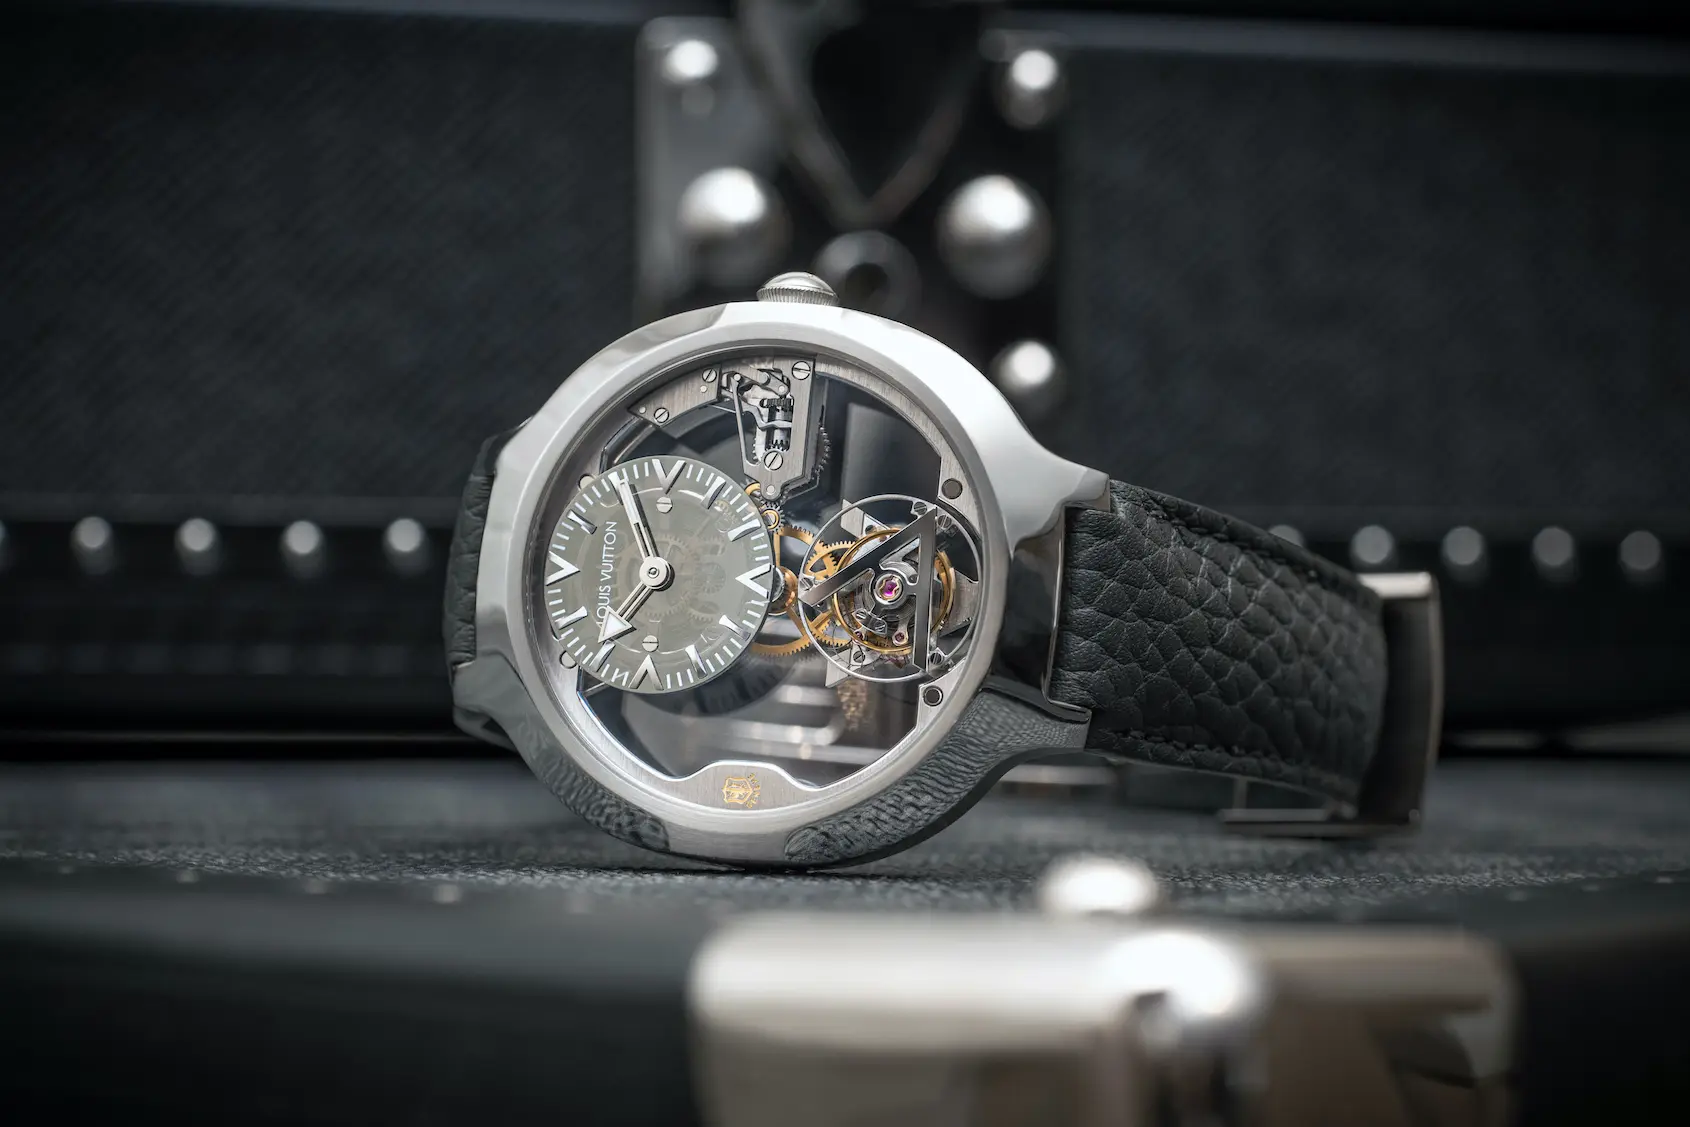 The craziest Louis Vuitton, Voyager Minute Repeater Flying